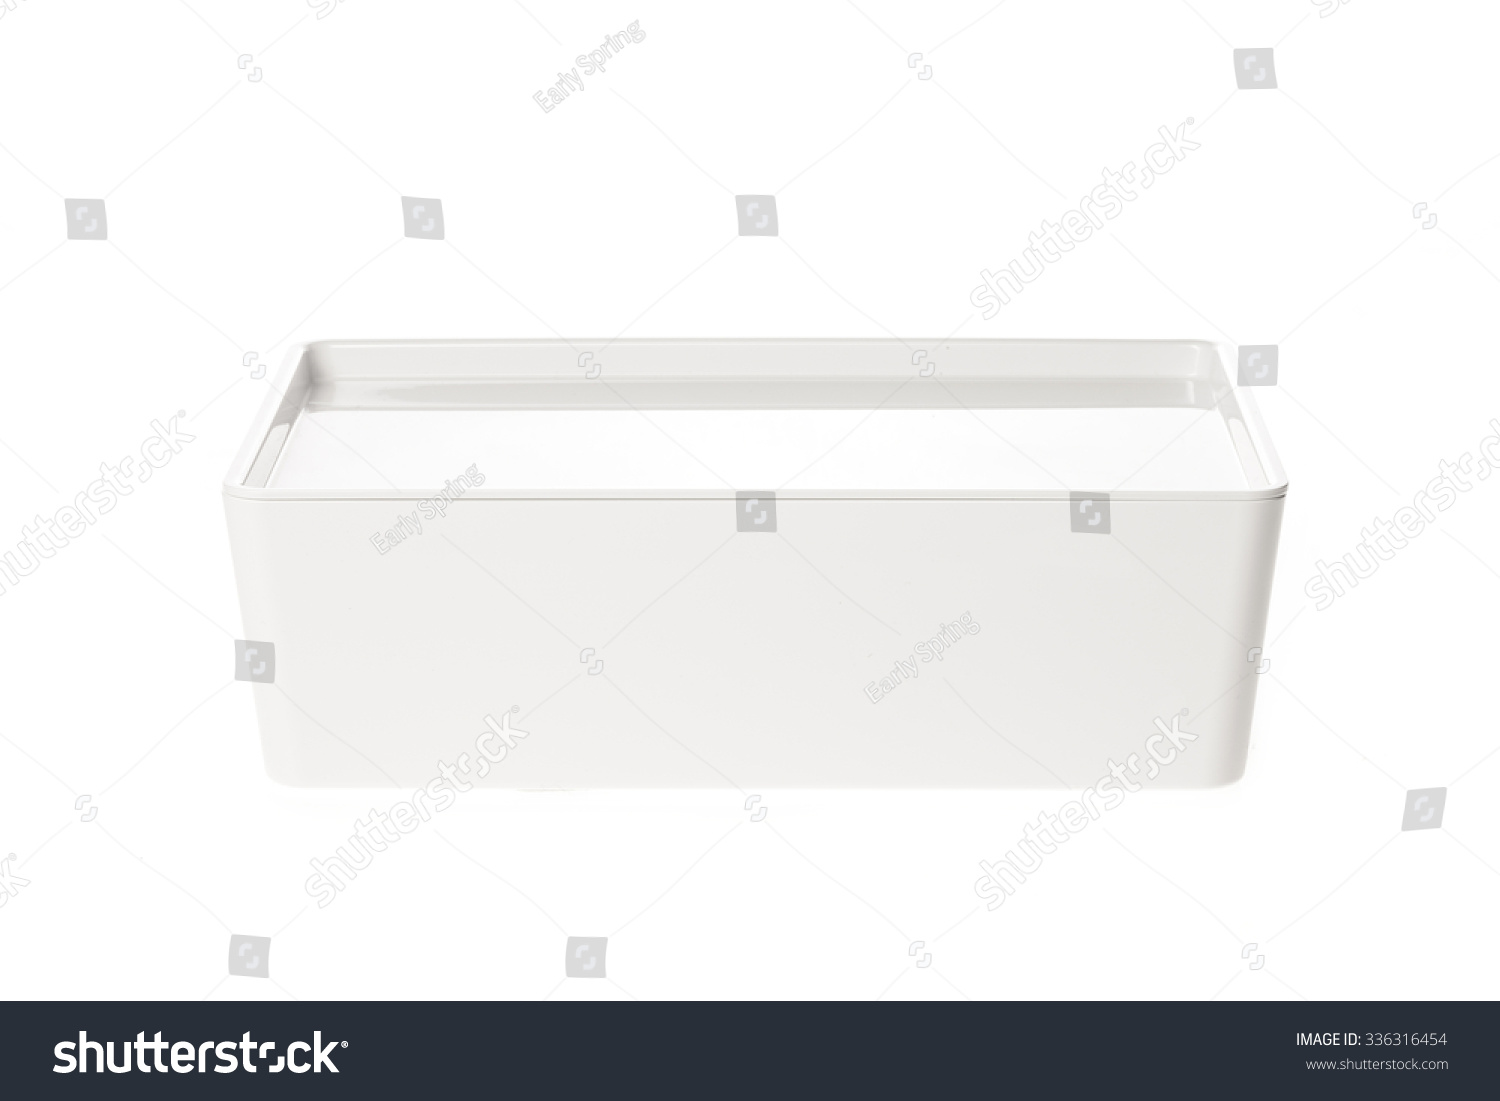 White Plastic Box Lid Emptyblink Container Stock Photo 336316454